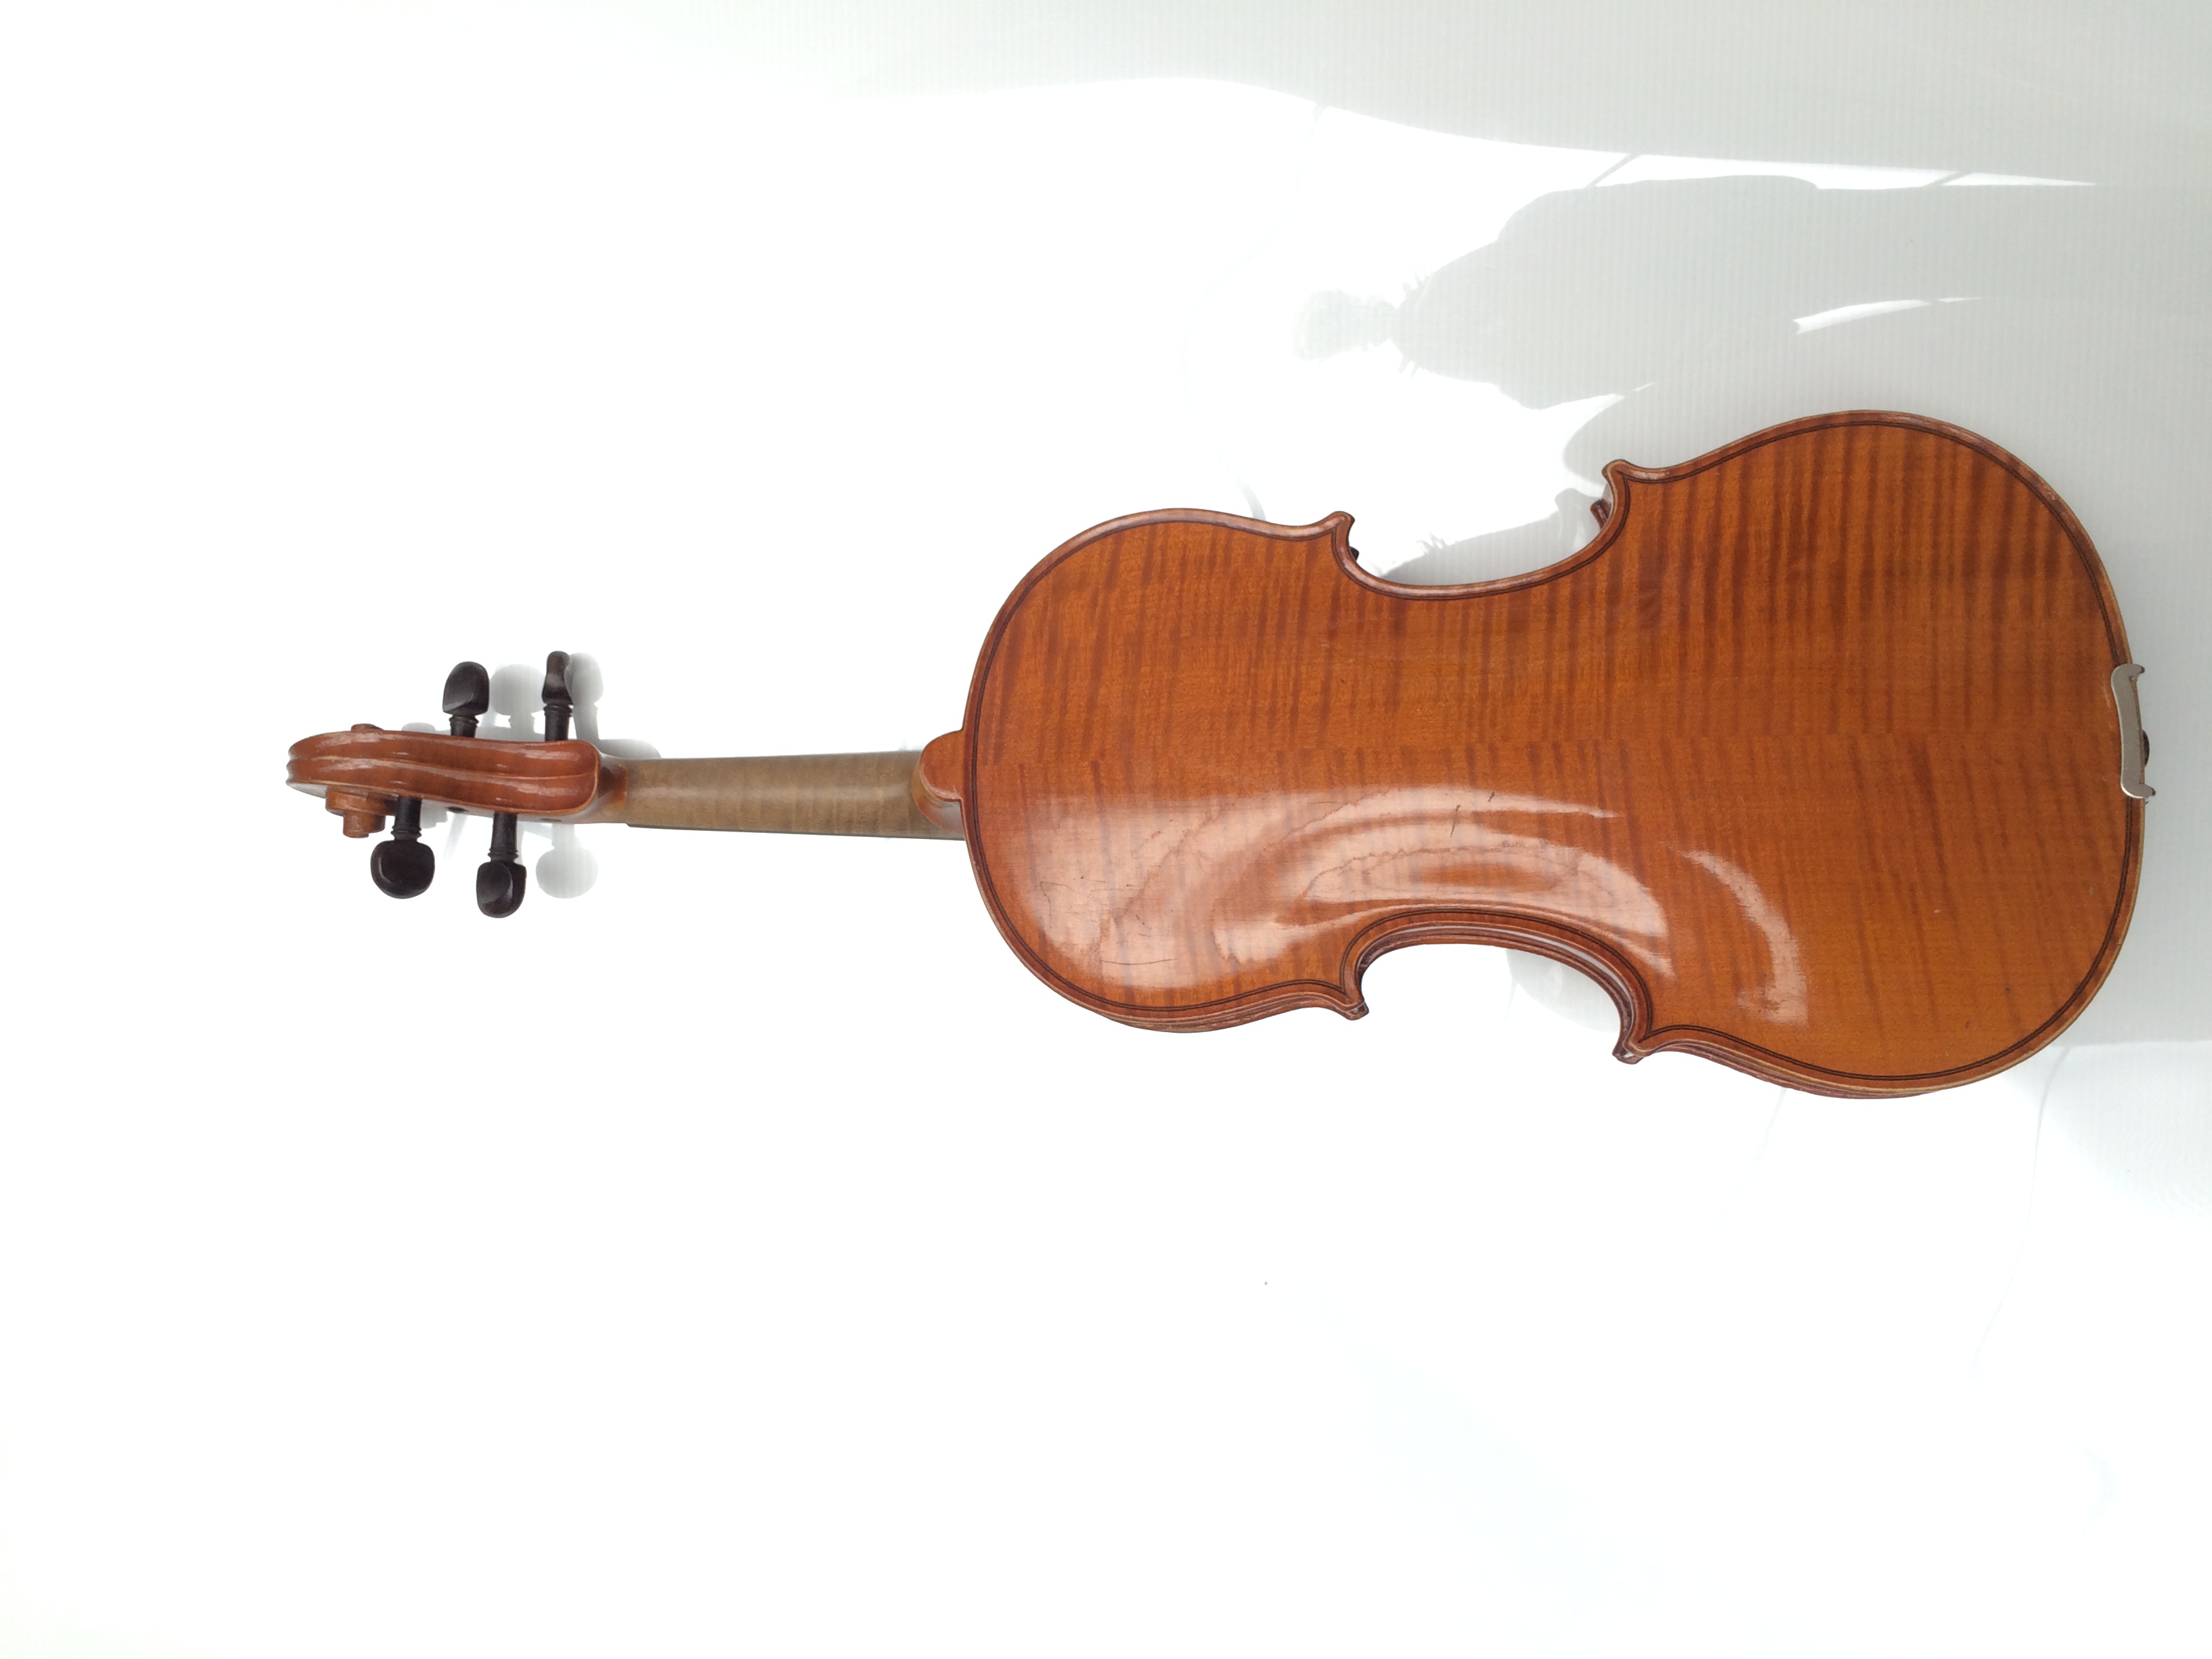 An early 20th century Hawkes & Son violin, labelled "Hawkes & Son Tyrolese Violin", Denham Street, - Image 3 of 4